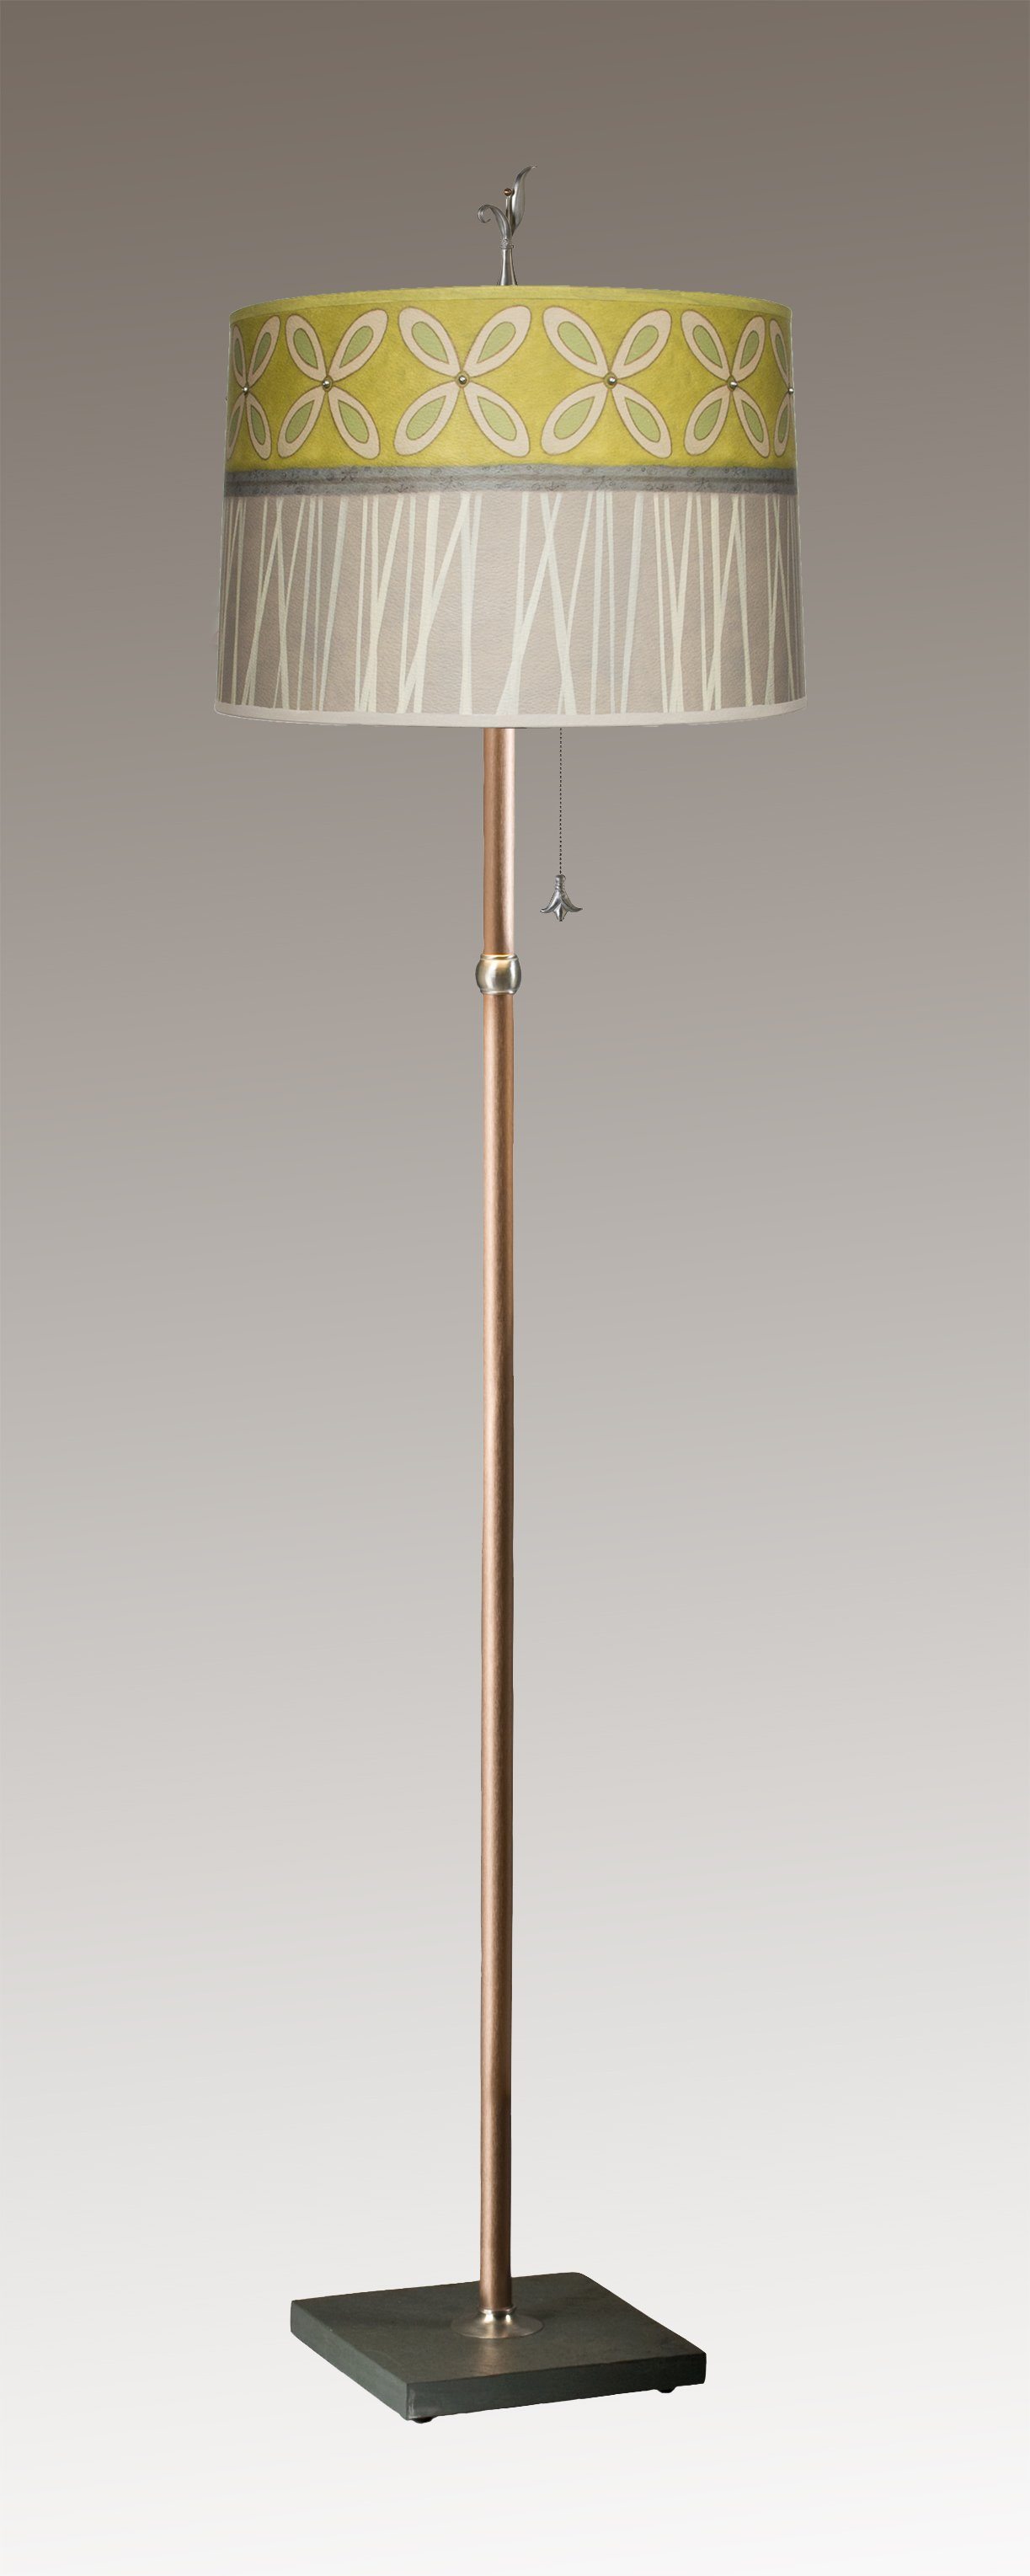 Janna Ugone & Co Floor Lamps Copper Floor Lamp with Large Drum Shade in Kiwi